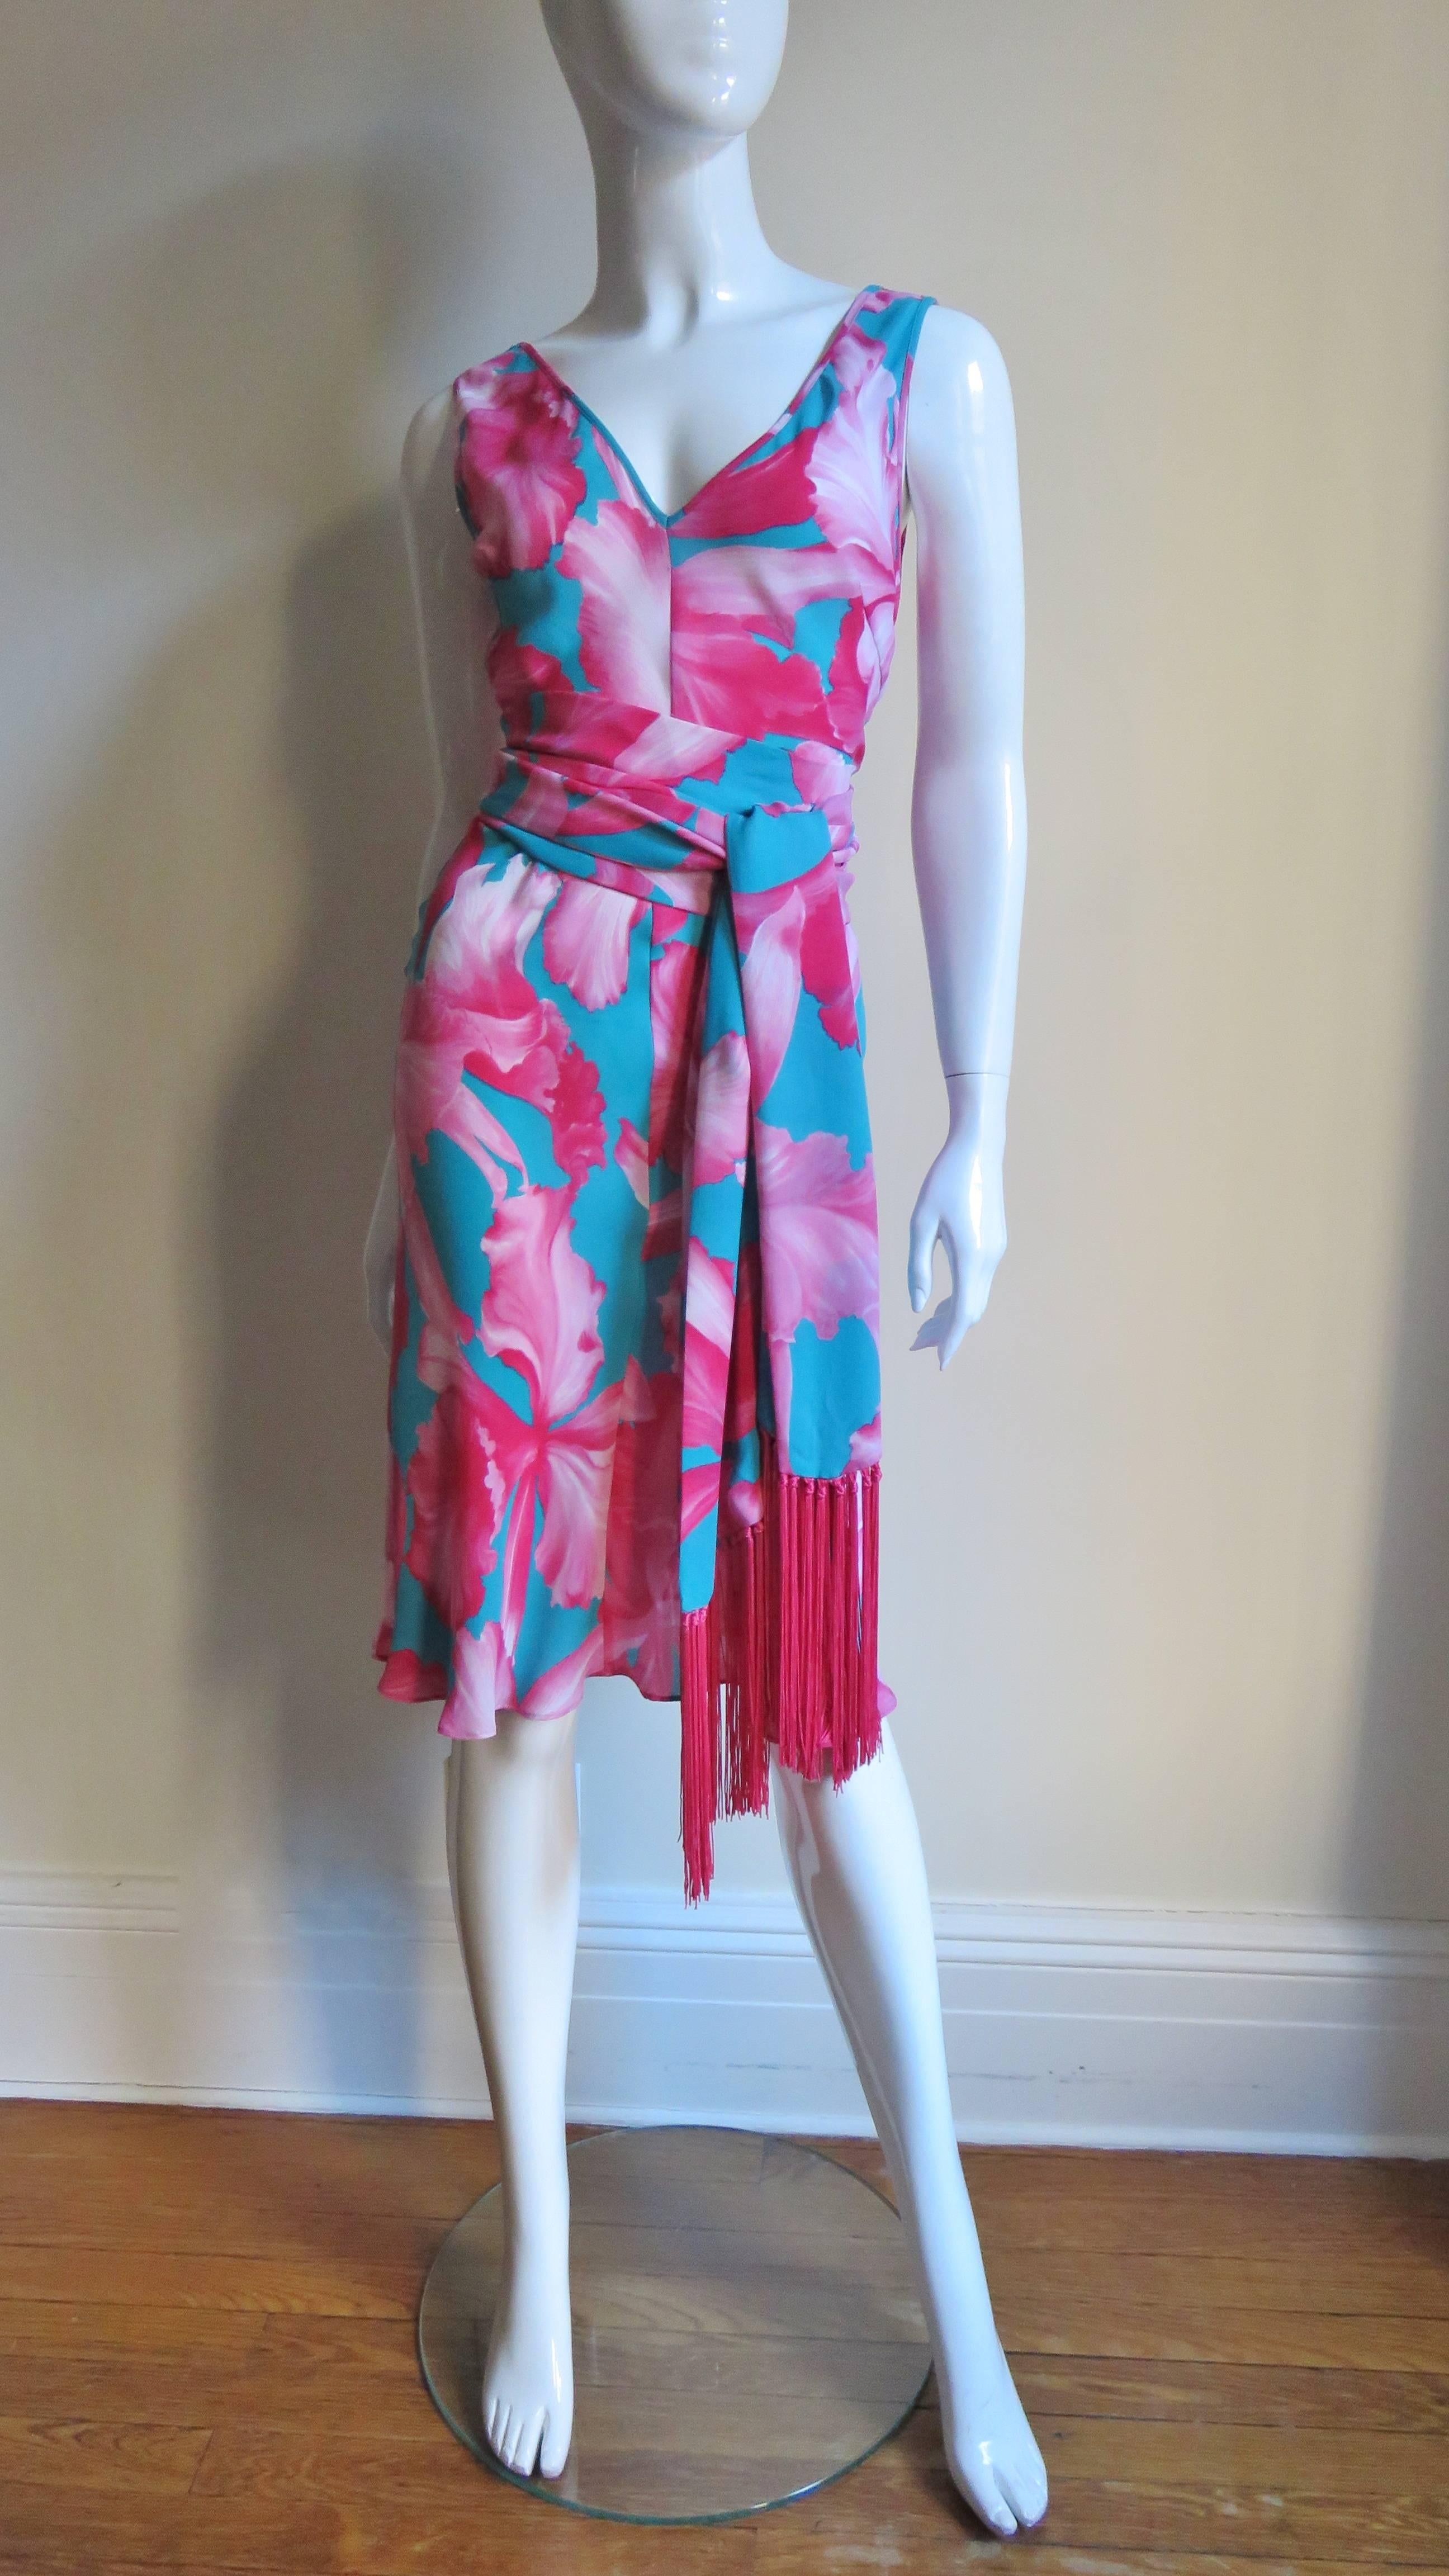  Celine Flower Print Silk Dress with Fringe Wrap In Excellent Condition For Sale In Water Mill, NY